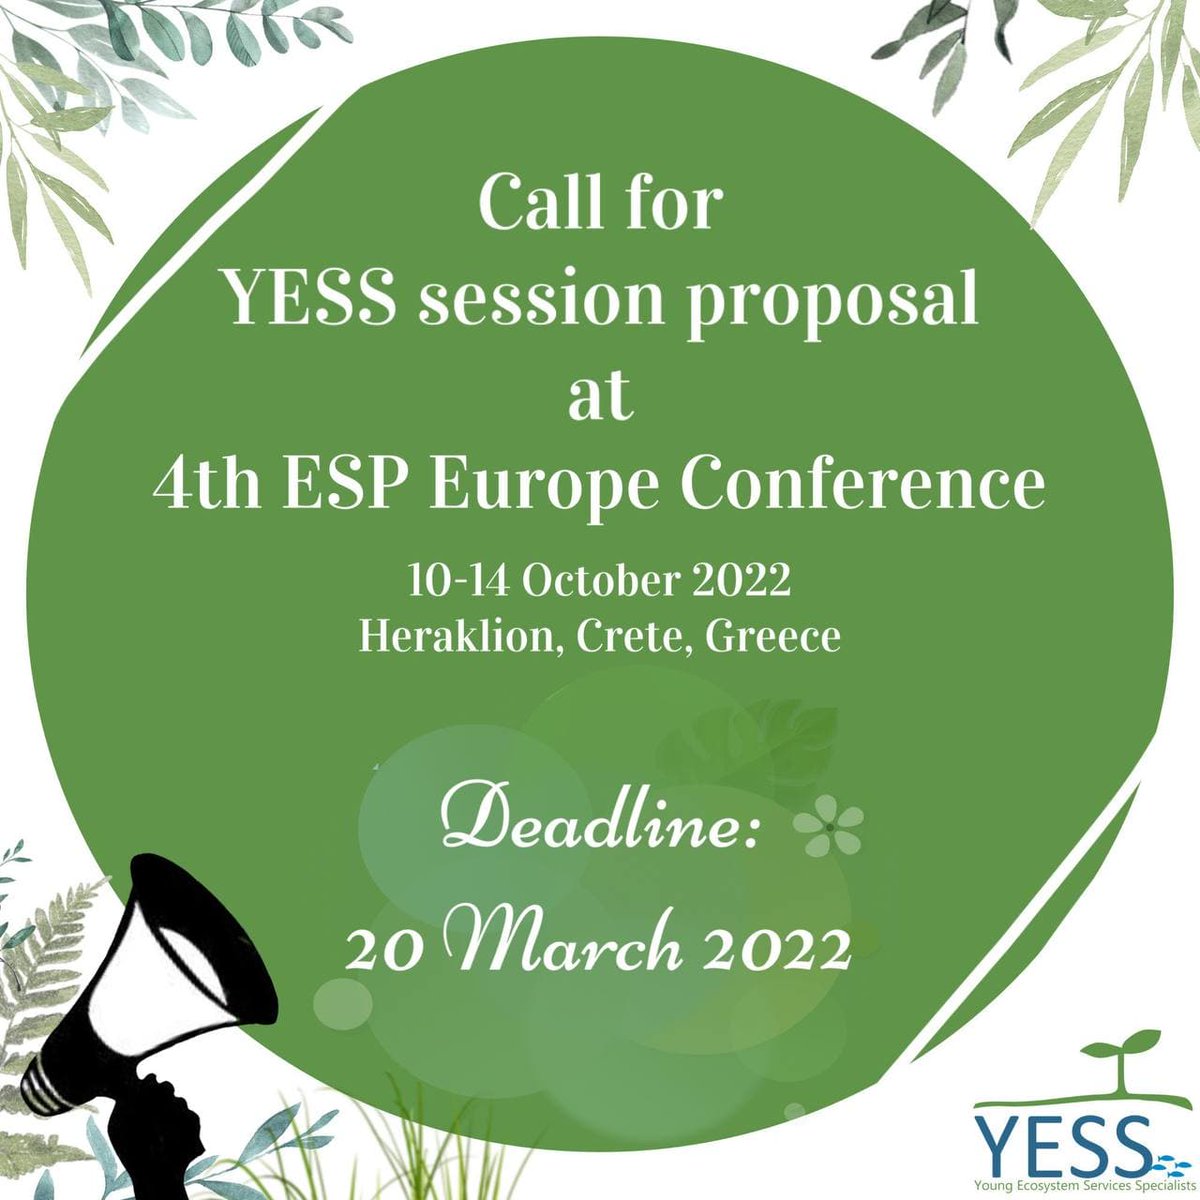 #CallForSessions for the @ESPartnership Europe conference 2022 Oct 10-14 in Heraklion🇬🇷. We welcome all🌱YESS members to take part in the session proposal. Interested? Drop us an email by 20 Mar & check our website bit.ly/364fajw for more
Looking forward to your ideas!